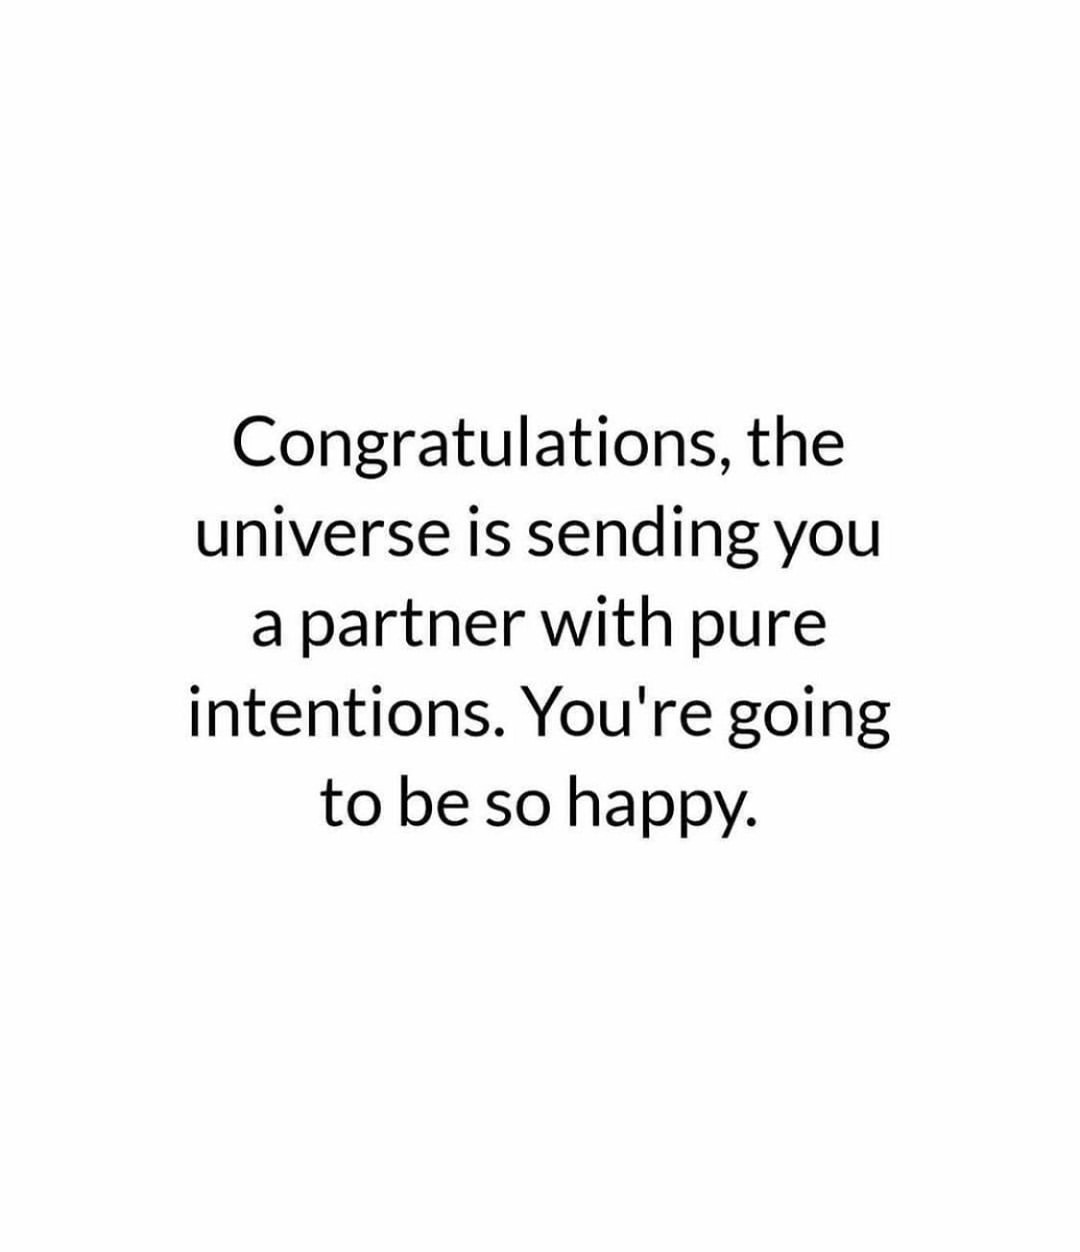 Congratulations, the universe is sending you a partner with pure intentions. You're going to be so happy.